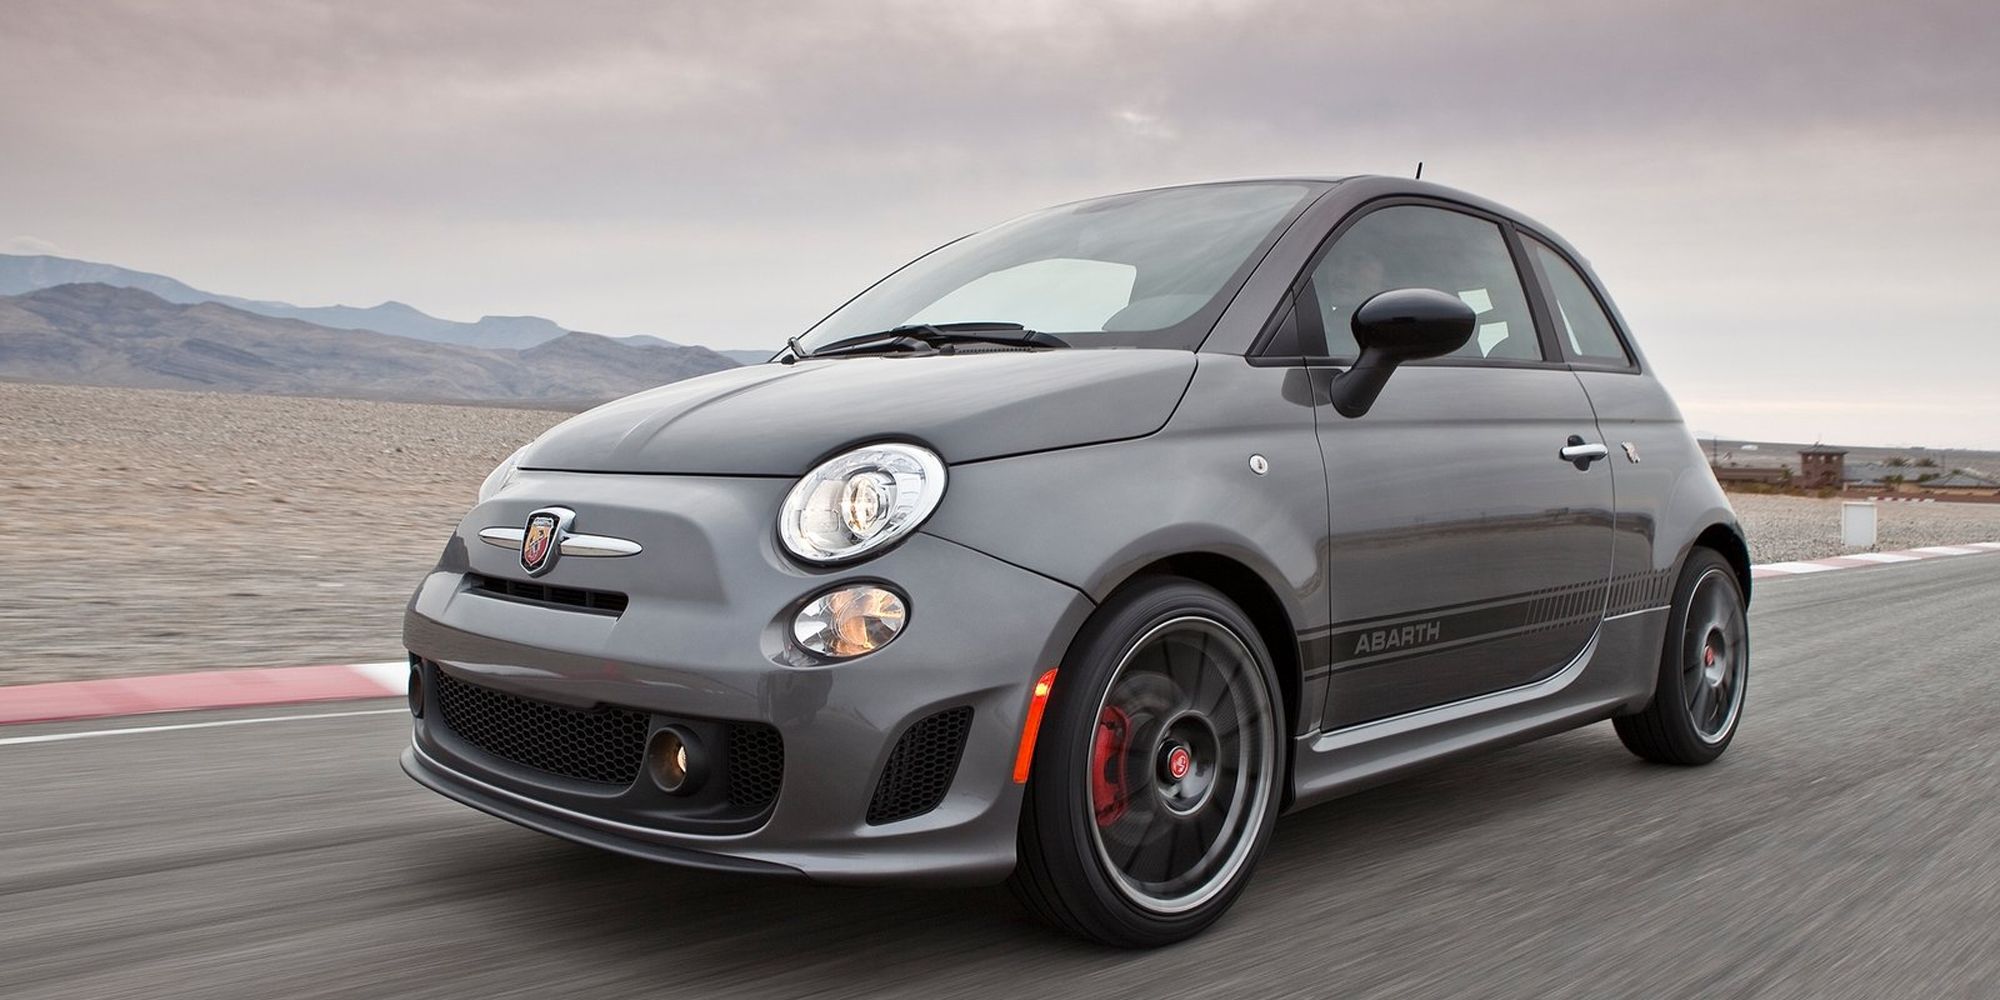 Front 3/4 view of a gray Abarth 500 on track